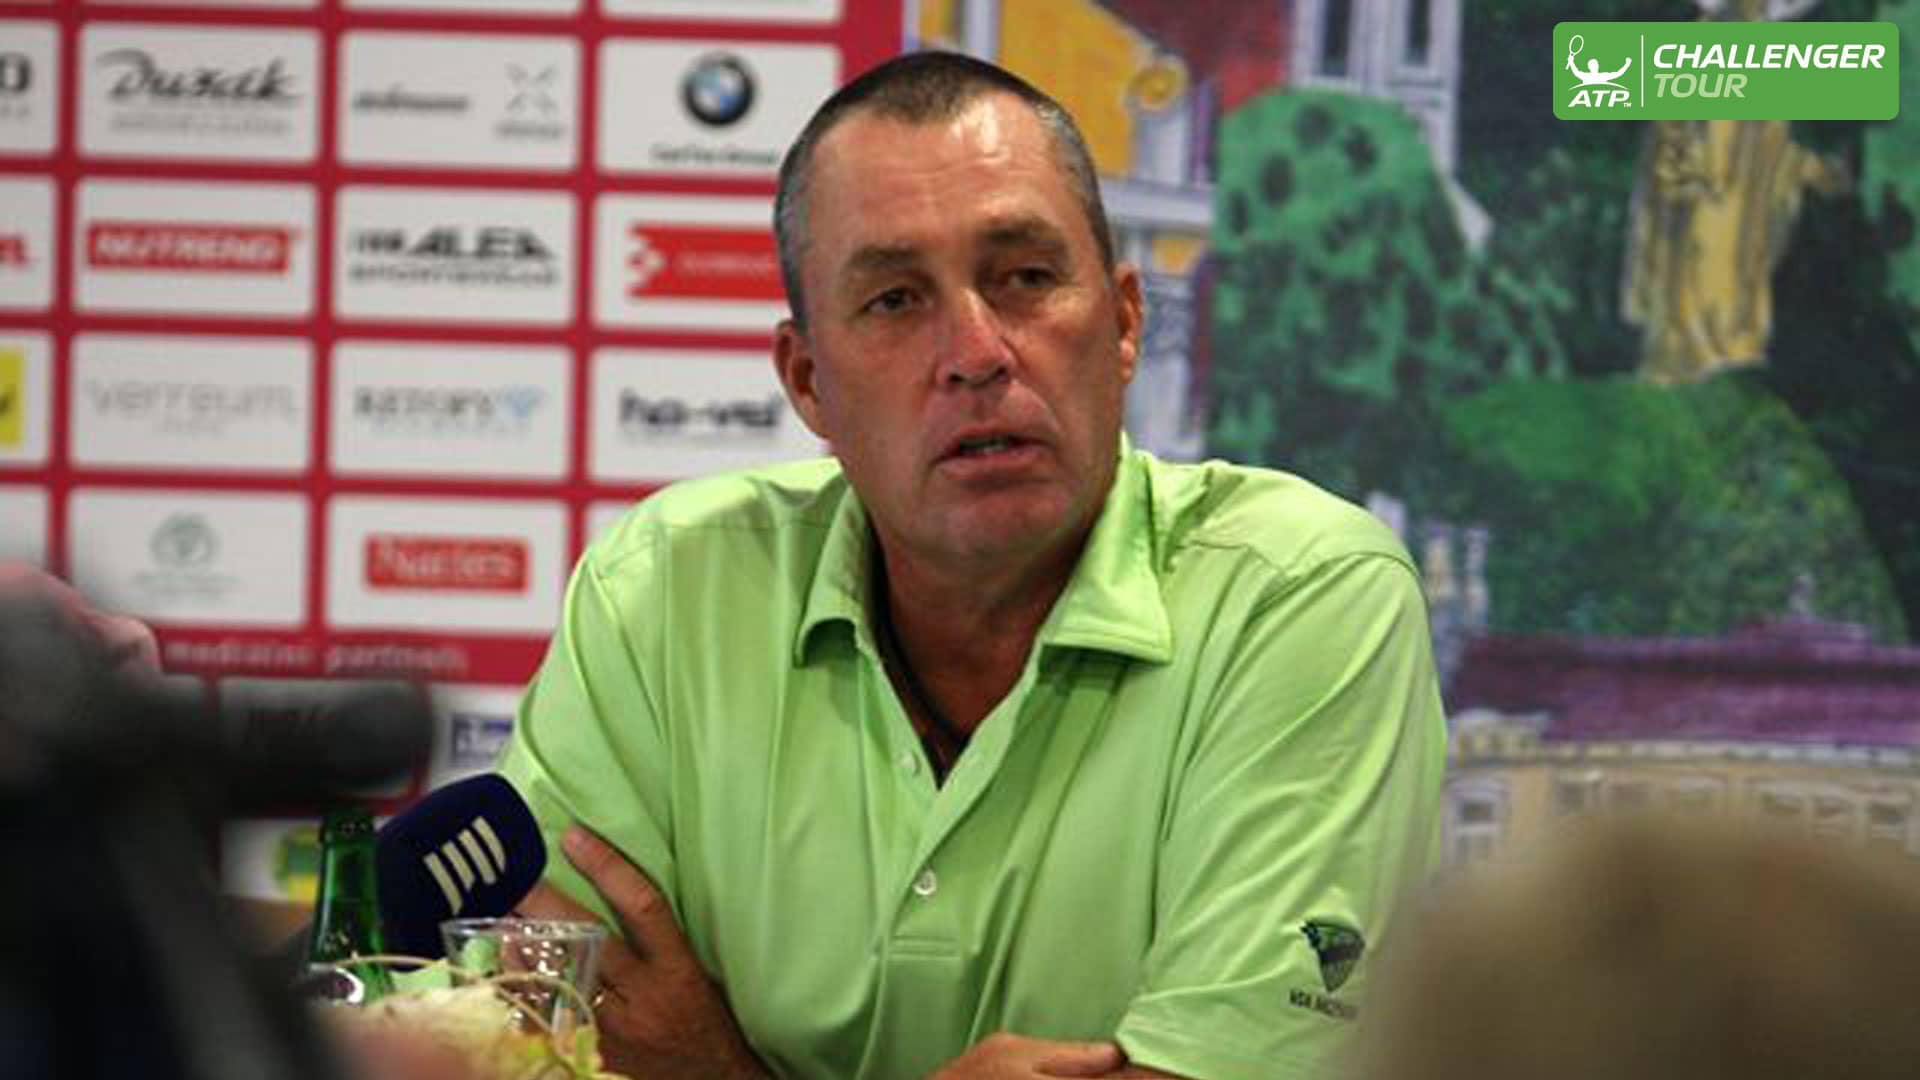 Ivan Lendl has spent this week promoting the ATP Challenger Tour event in Prostejov.